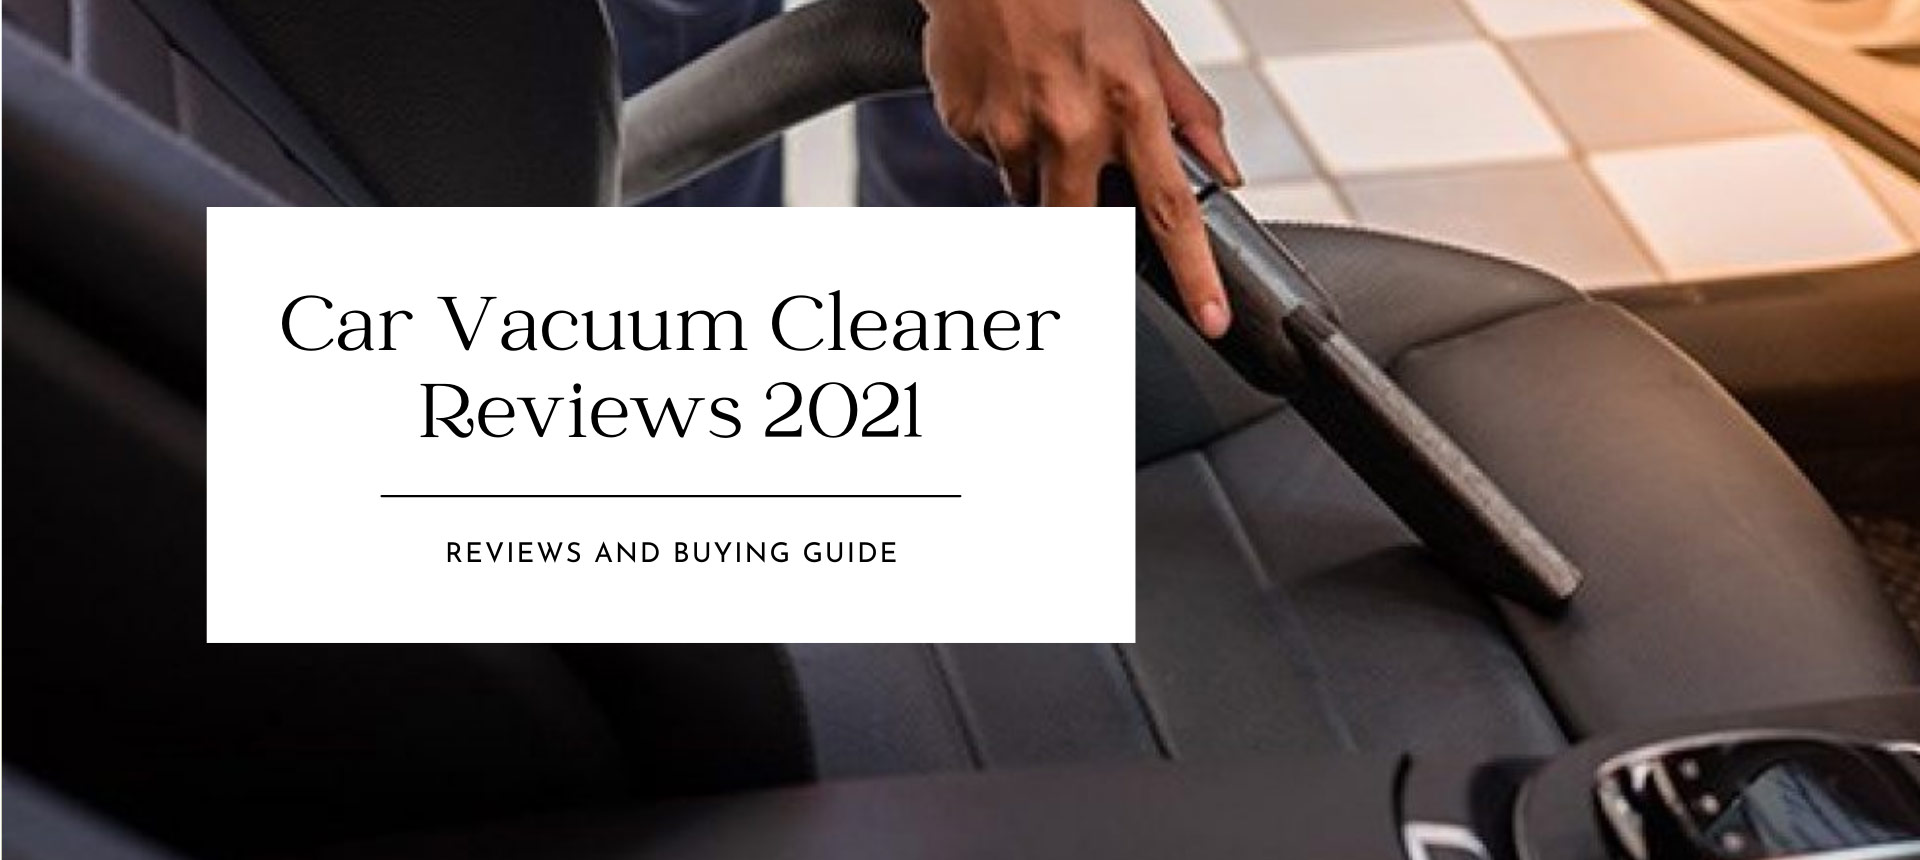 This Car Vacuum Cleaner With 206,000 Reviews Is Just $20 for a Few More Hours